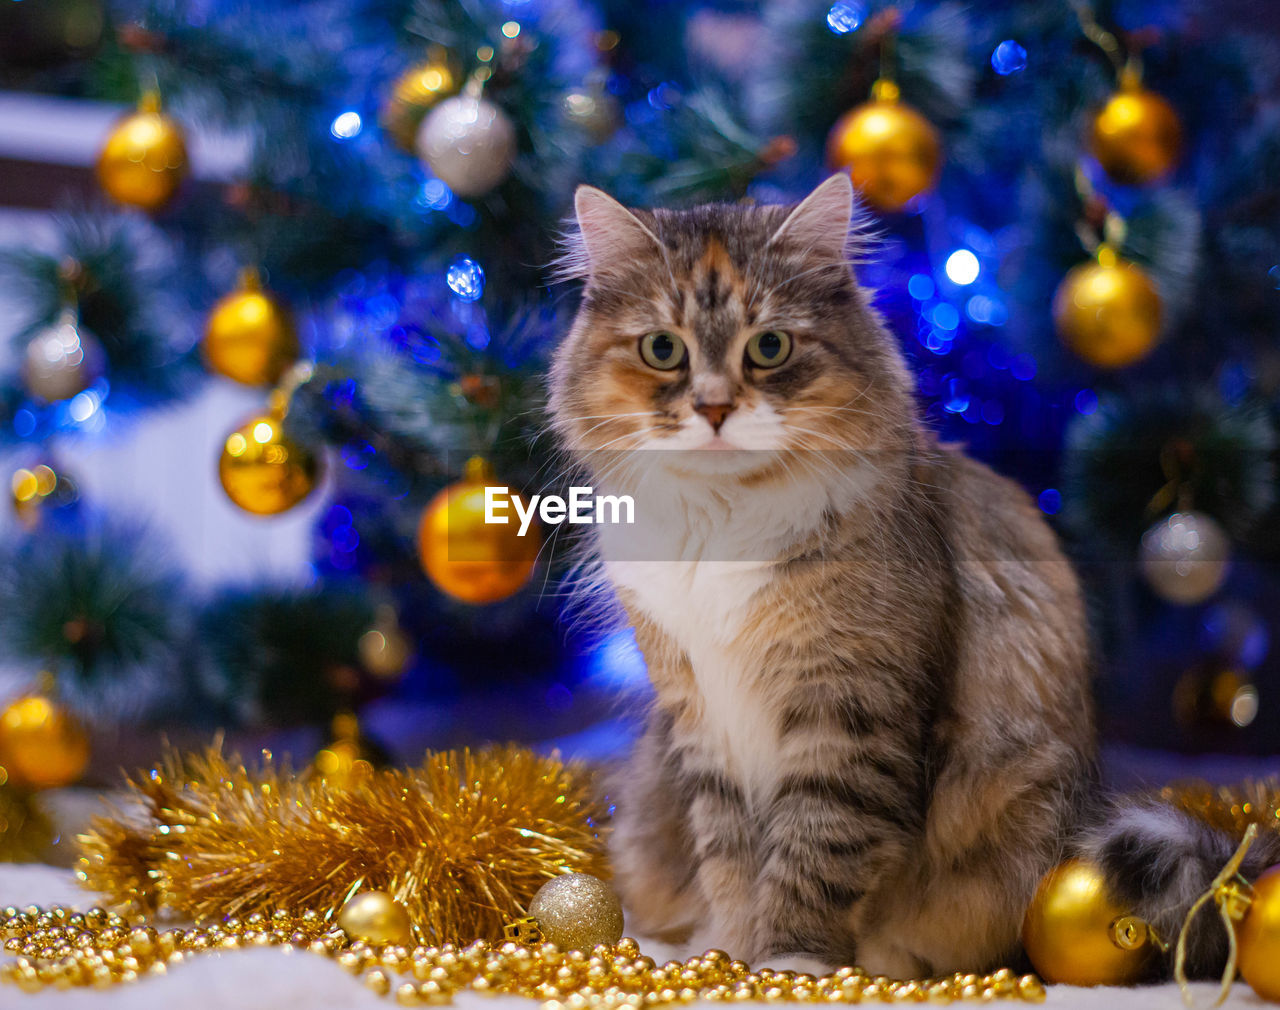 Tabby cat sitting on the christmas background sibirien pet